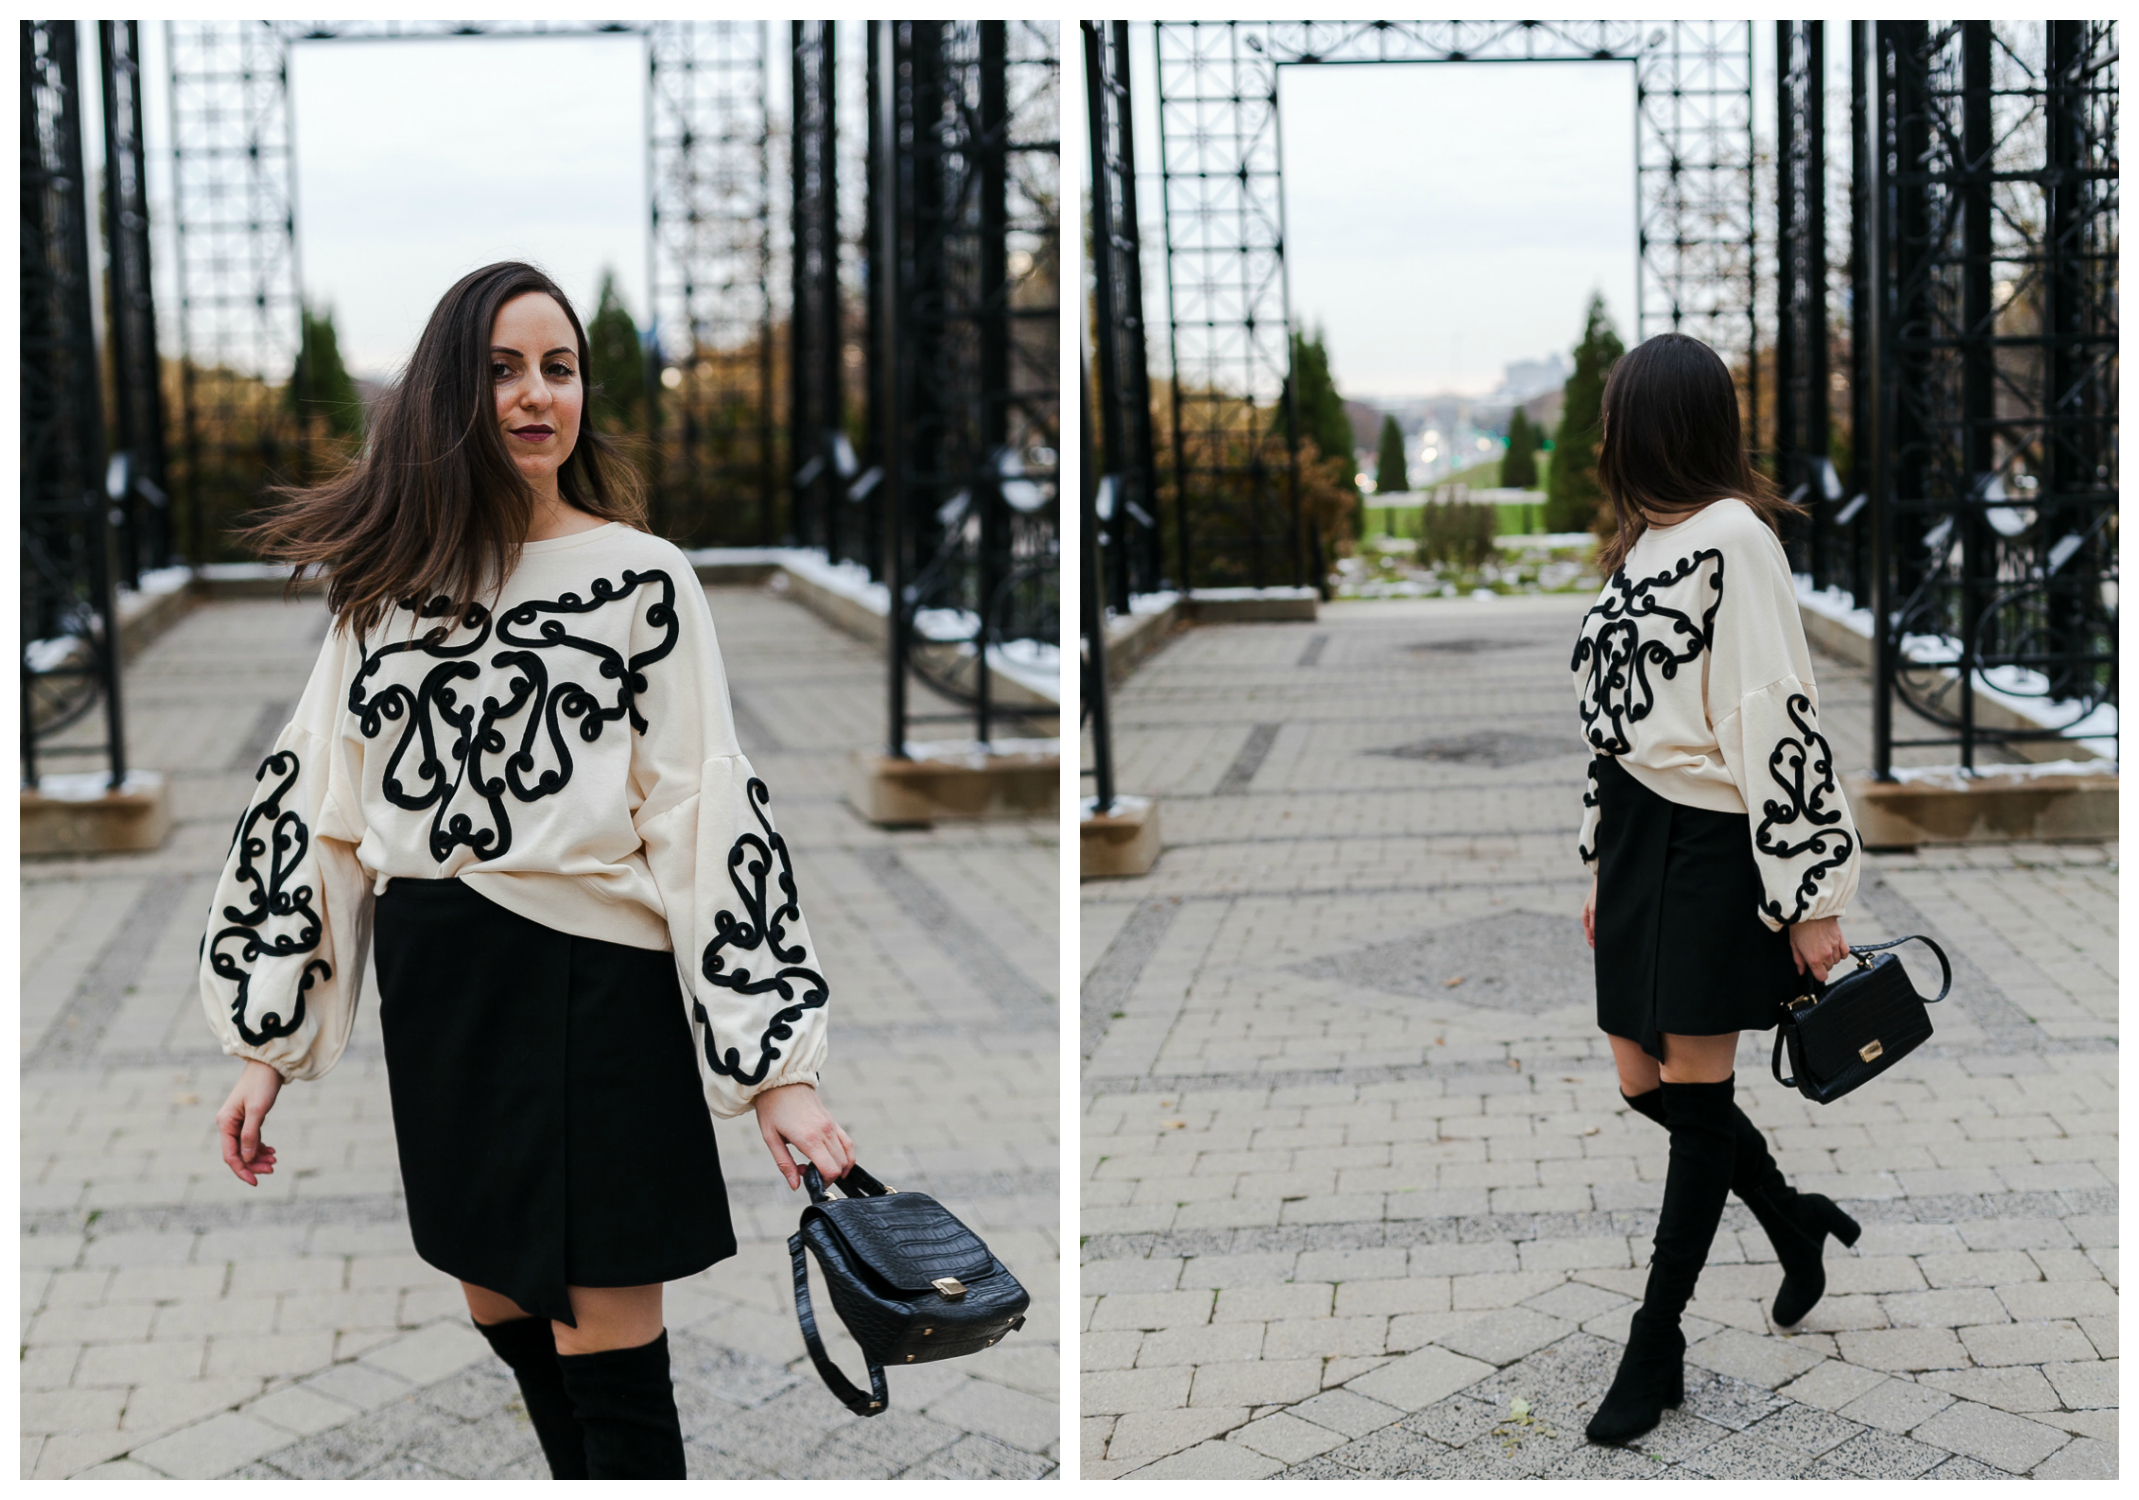 Yana Frigelis of NoMad Luxuries wearing an embroidered sweatshirt from zara and over the knee boots for a simple yet statement making outfit 